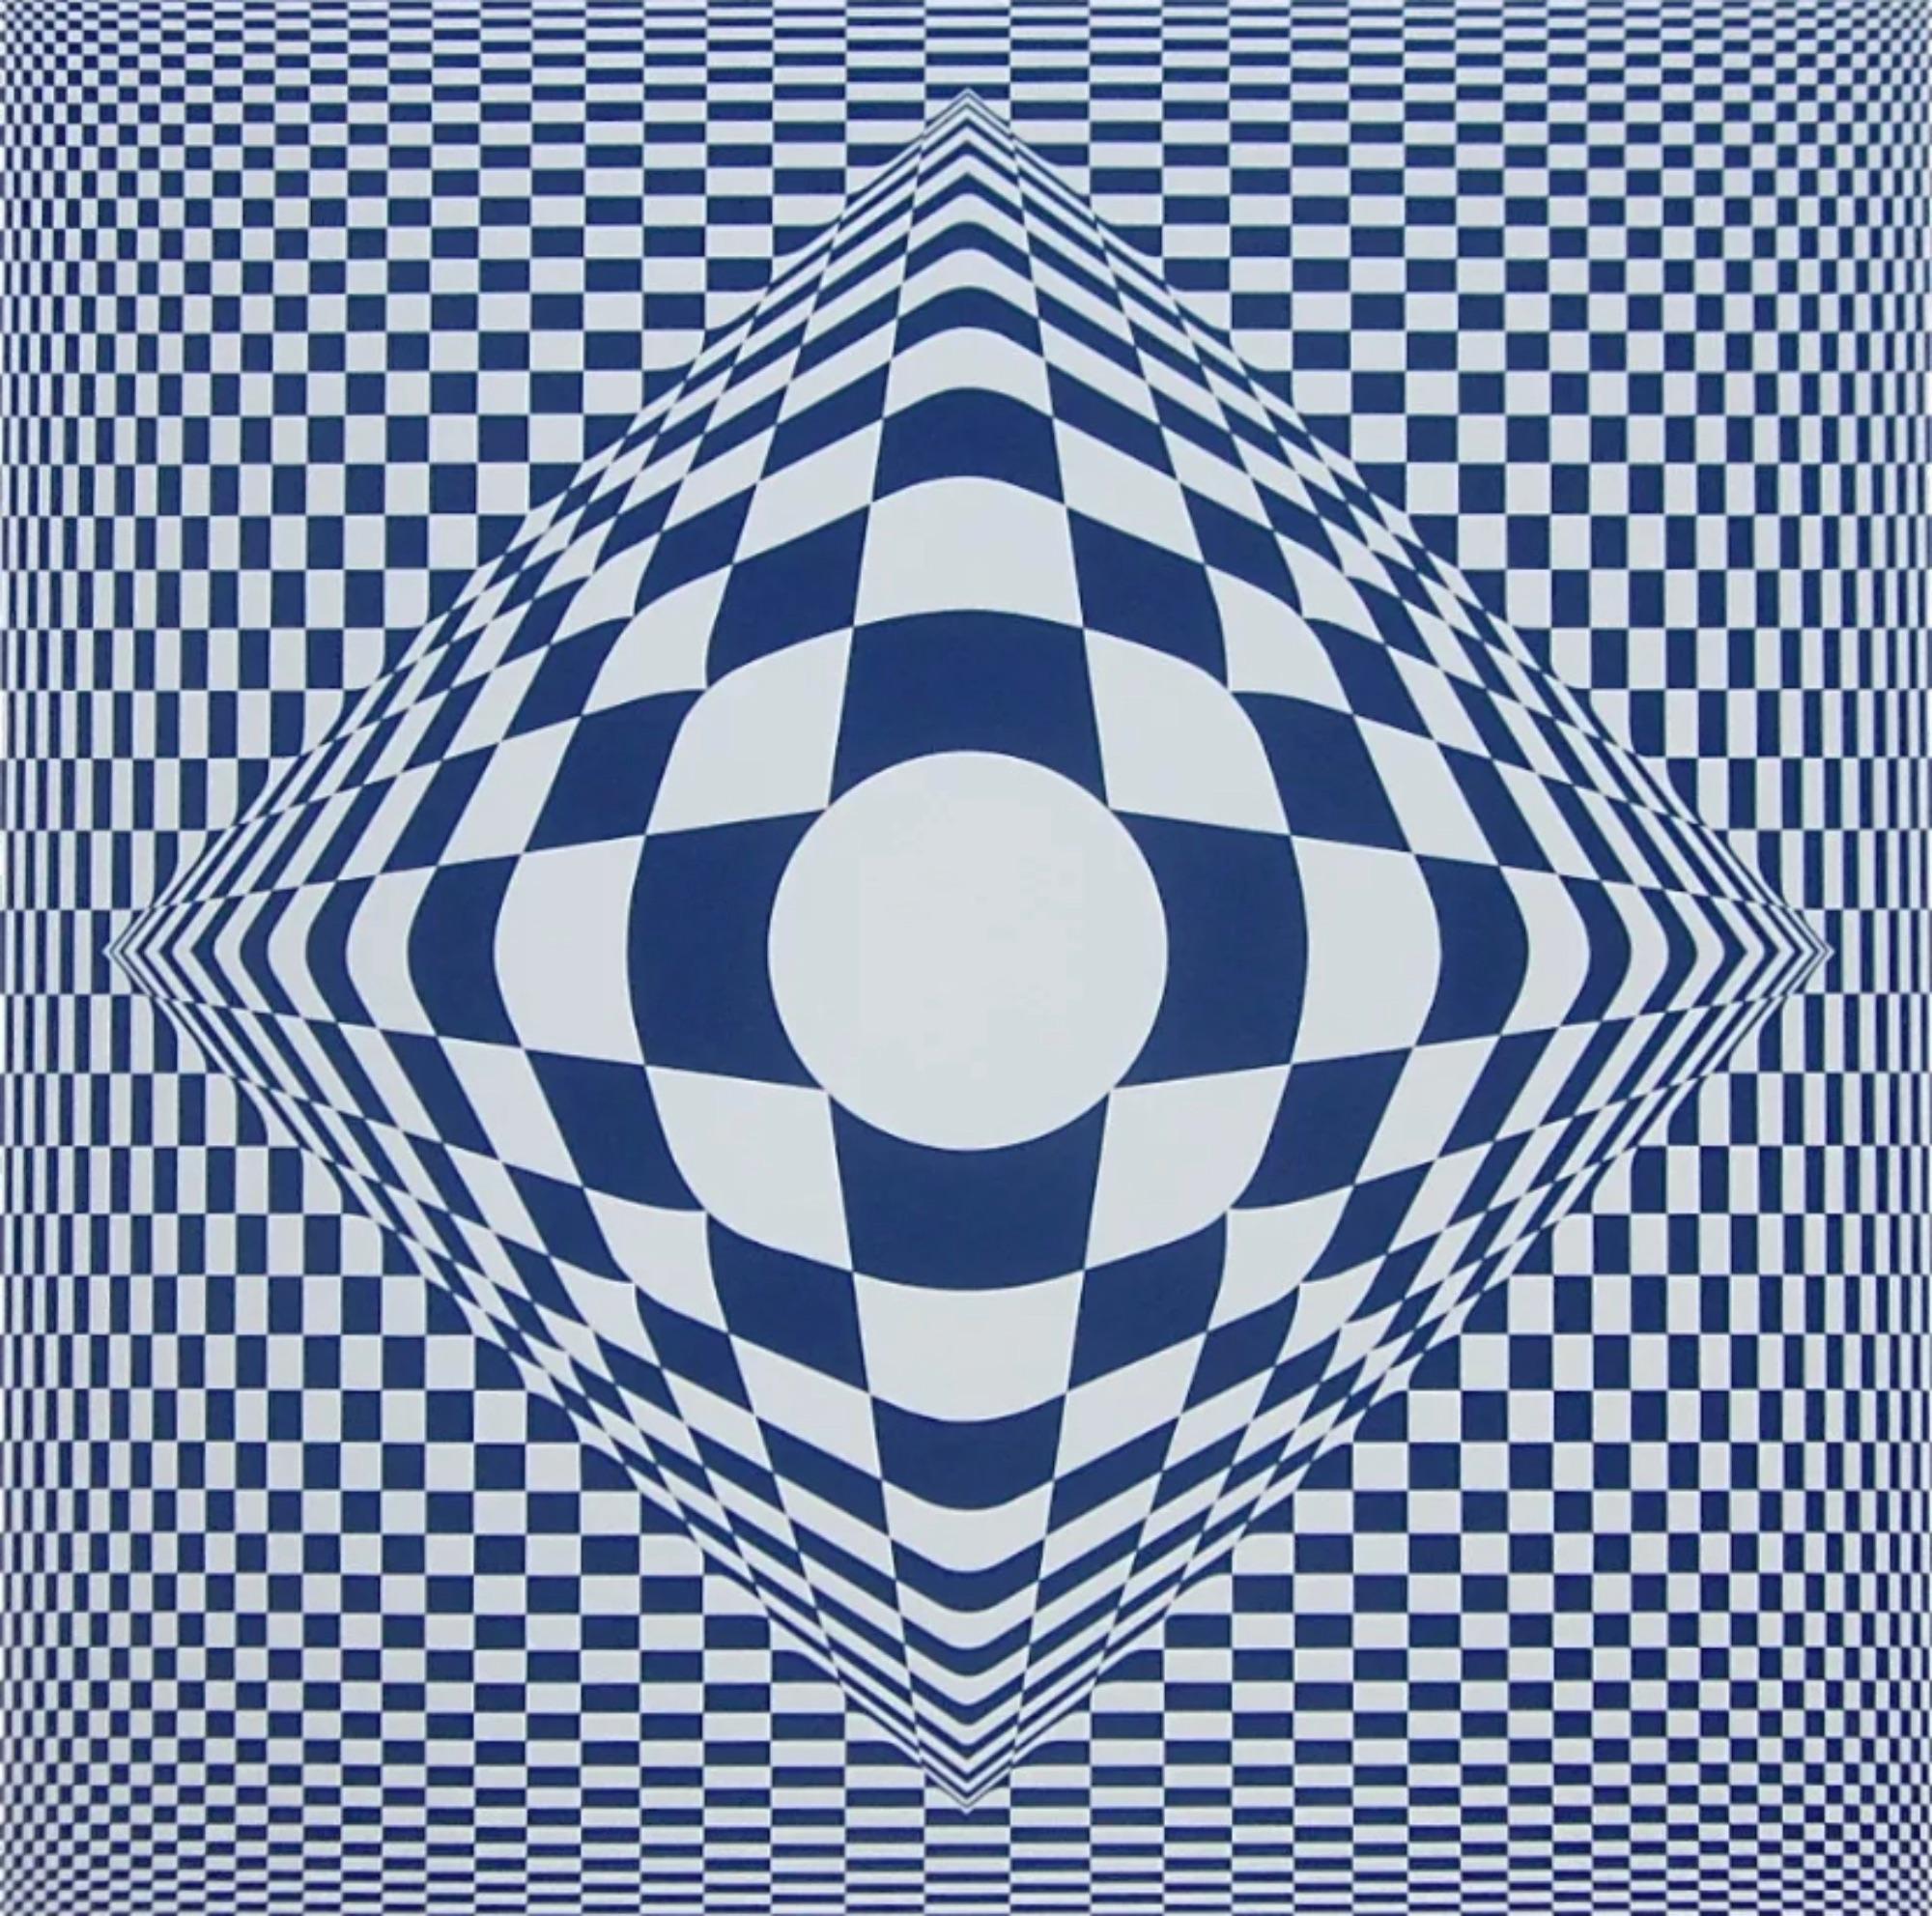 Artist: Victor Vasarely (1908-1997)
Title: Vertigo
Year: 1982
Medium: Silkscreen on Arches paper
Edition: 88/325, plus proofs
Size: 26.75 x 22.75 inches
Condition: Good
Inscription: Signed and numbered by the artist.
Notes:  Published by Atelier